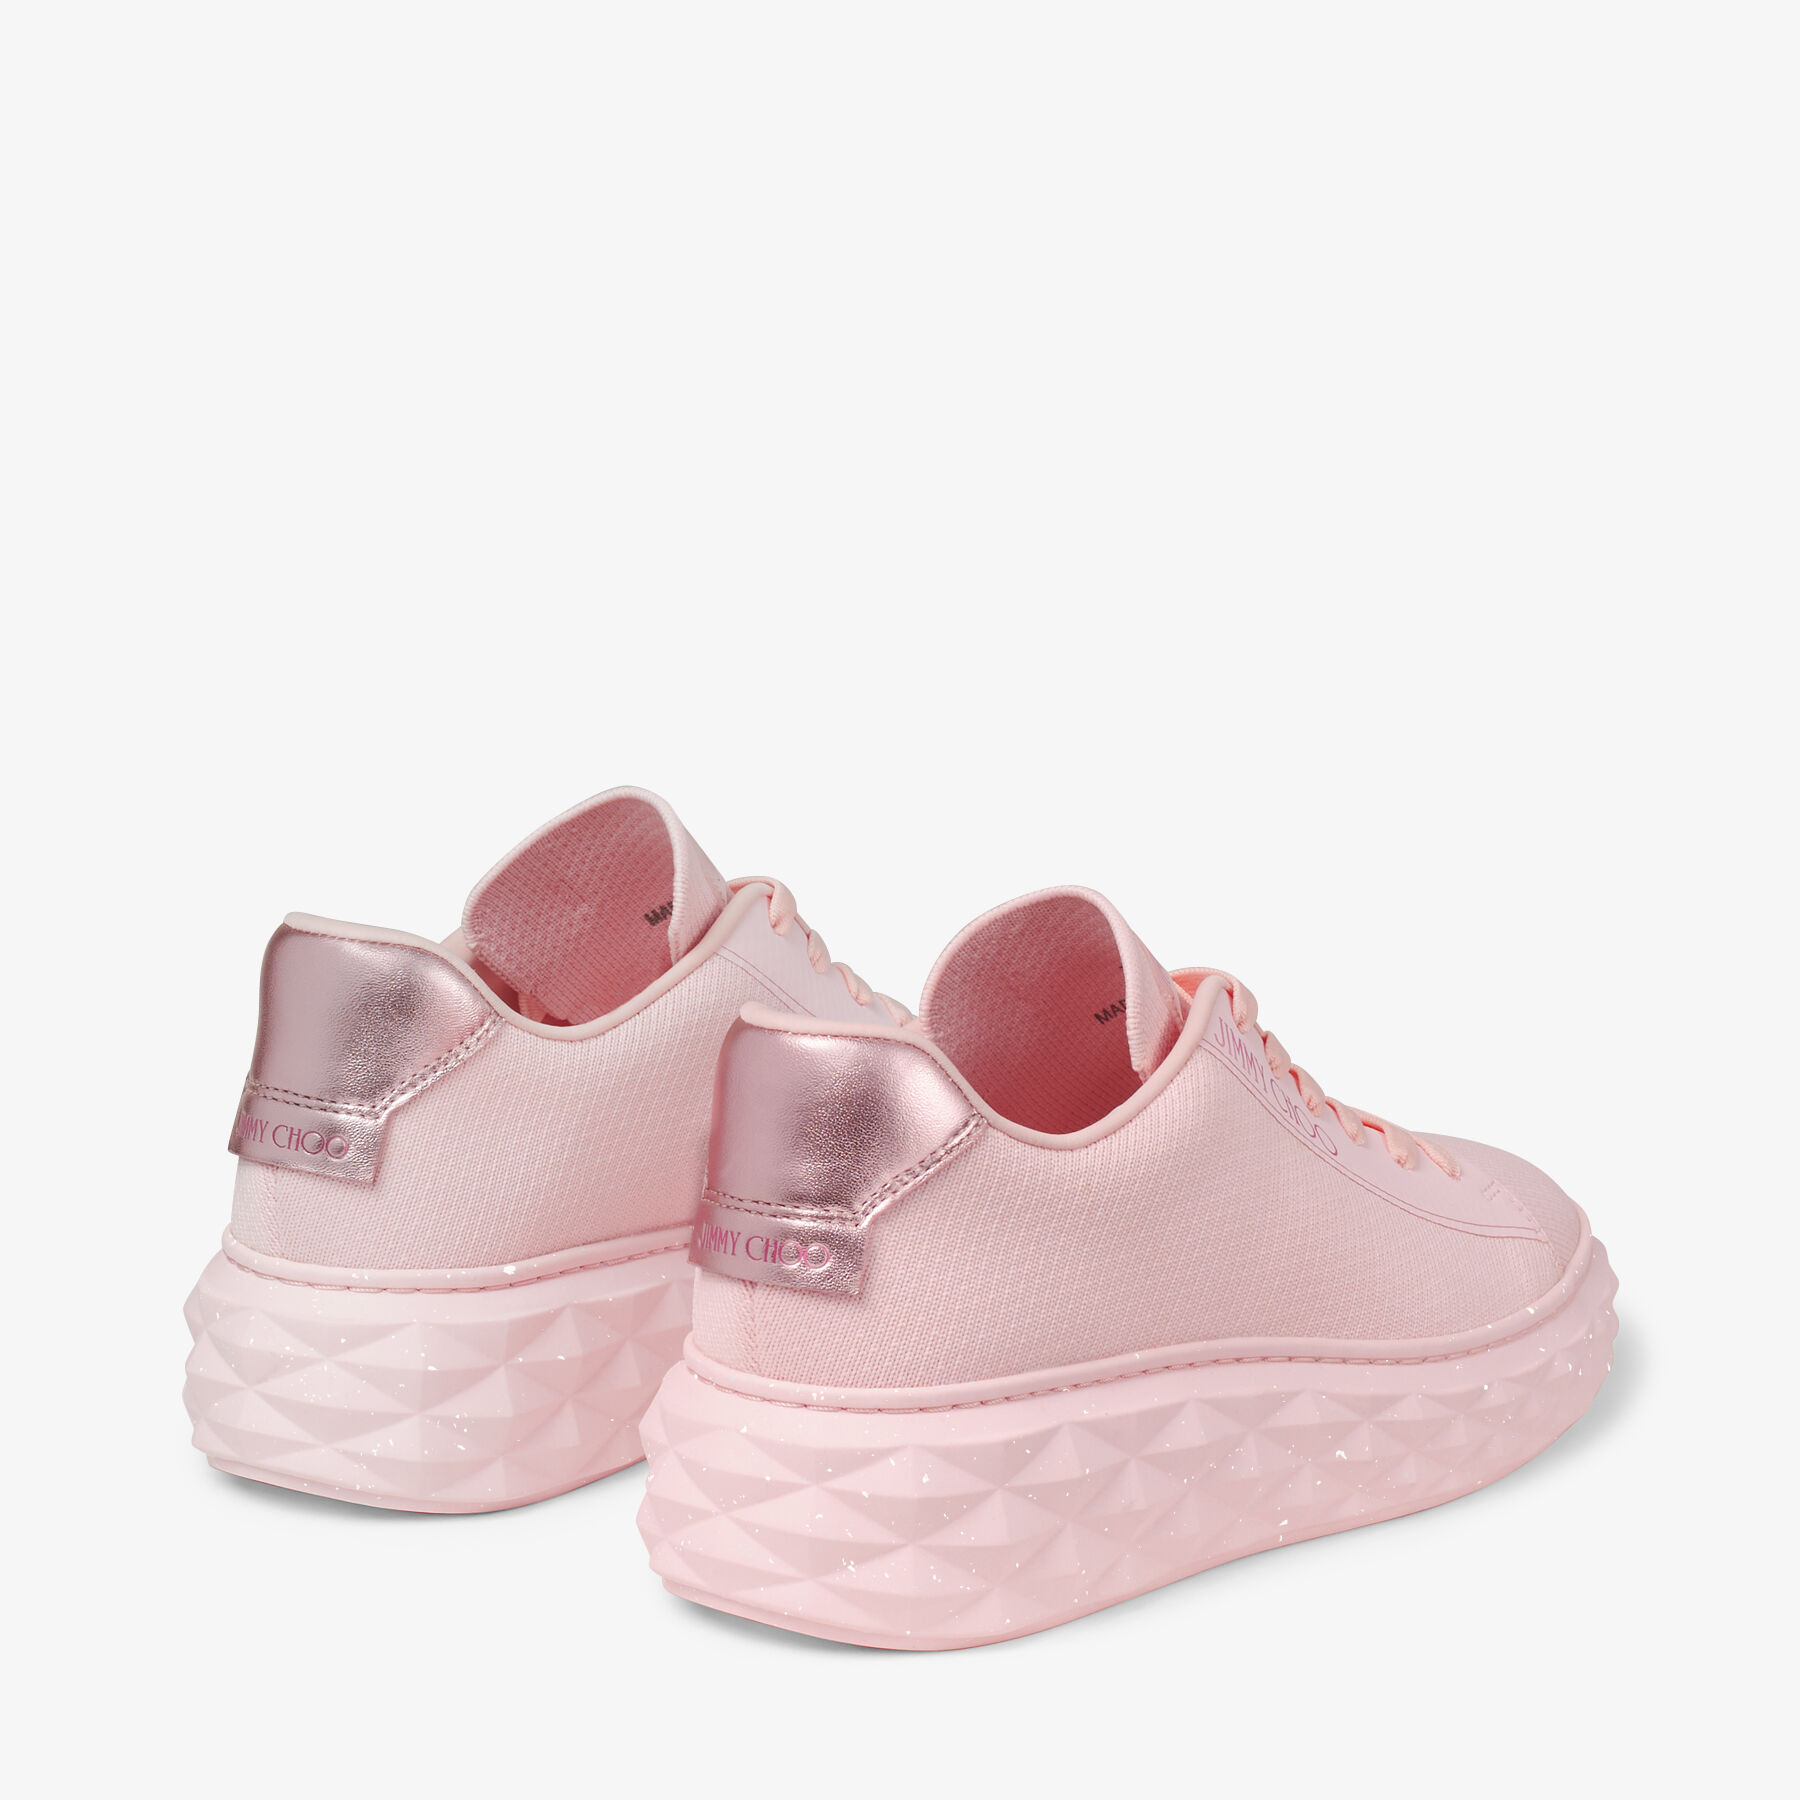 DIAMOND LIGHT MAXI/F | Powder Pink Knit Low-Top Trainers with 